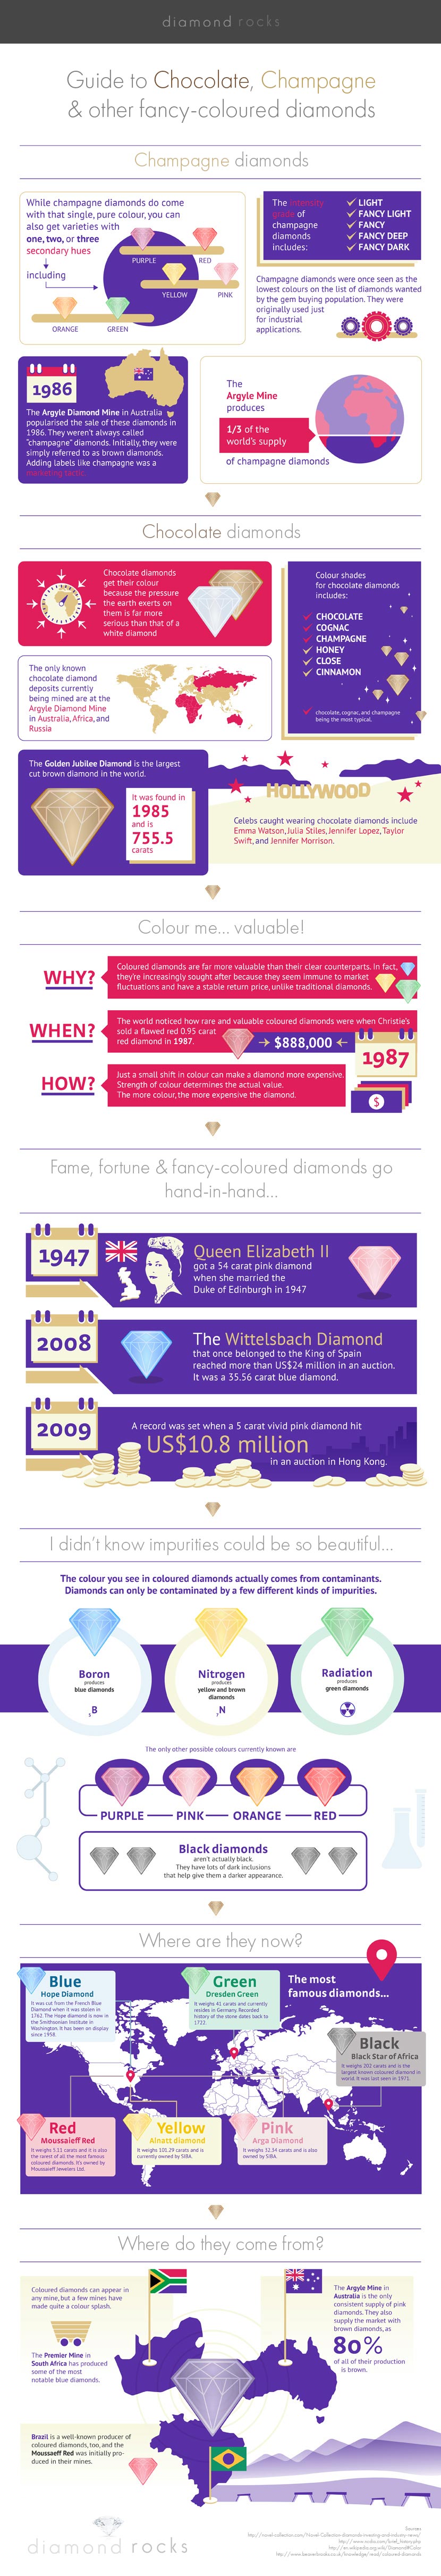 Infographic guide to chocolate, champagne and fancy-coloured diamonds